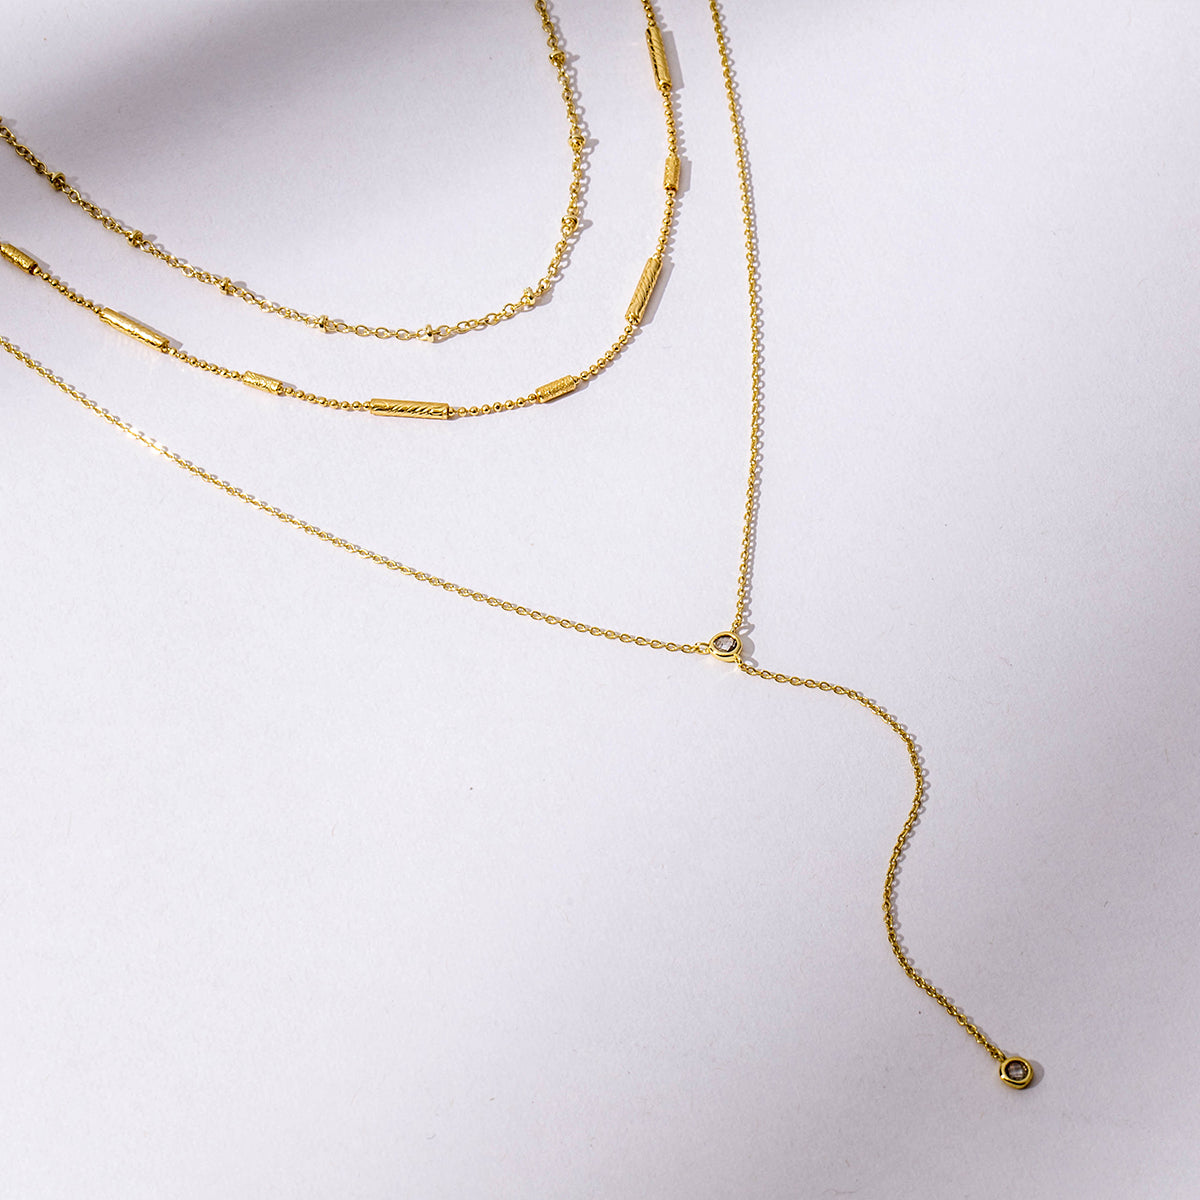 Dainty Dreams Necklace Set | Gold | Product Image | Uncommon James